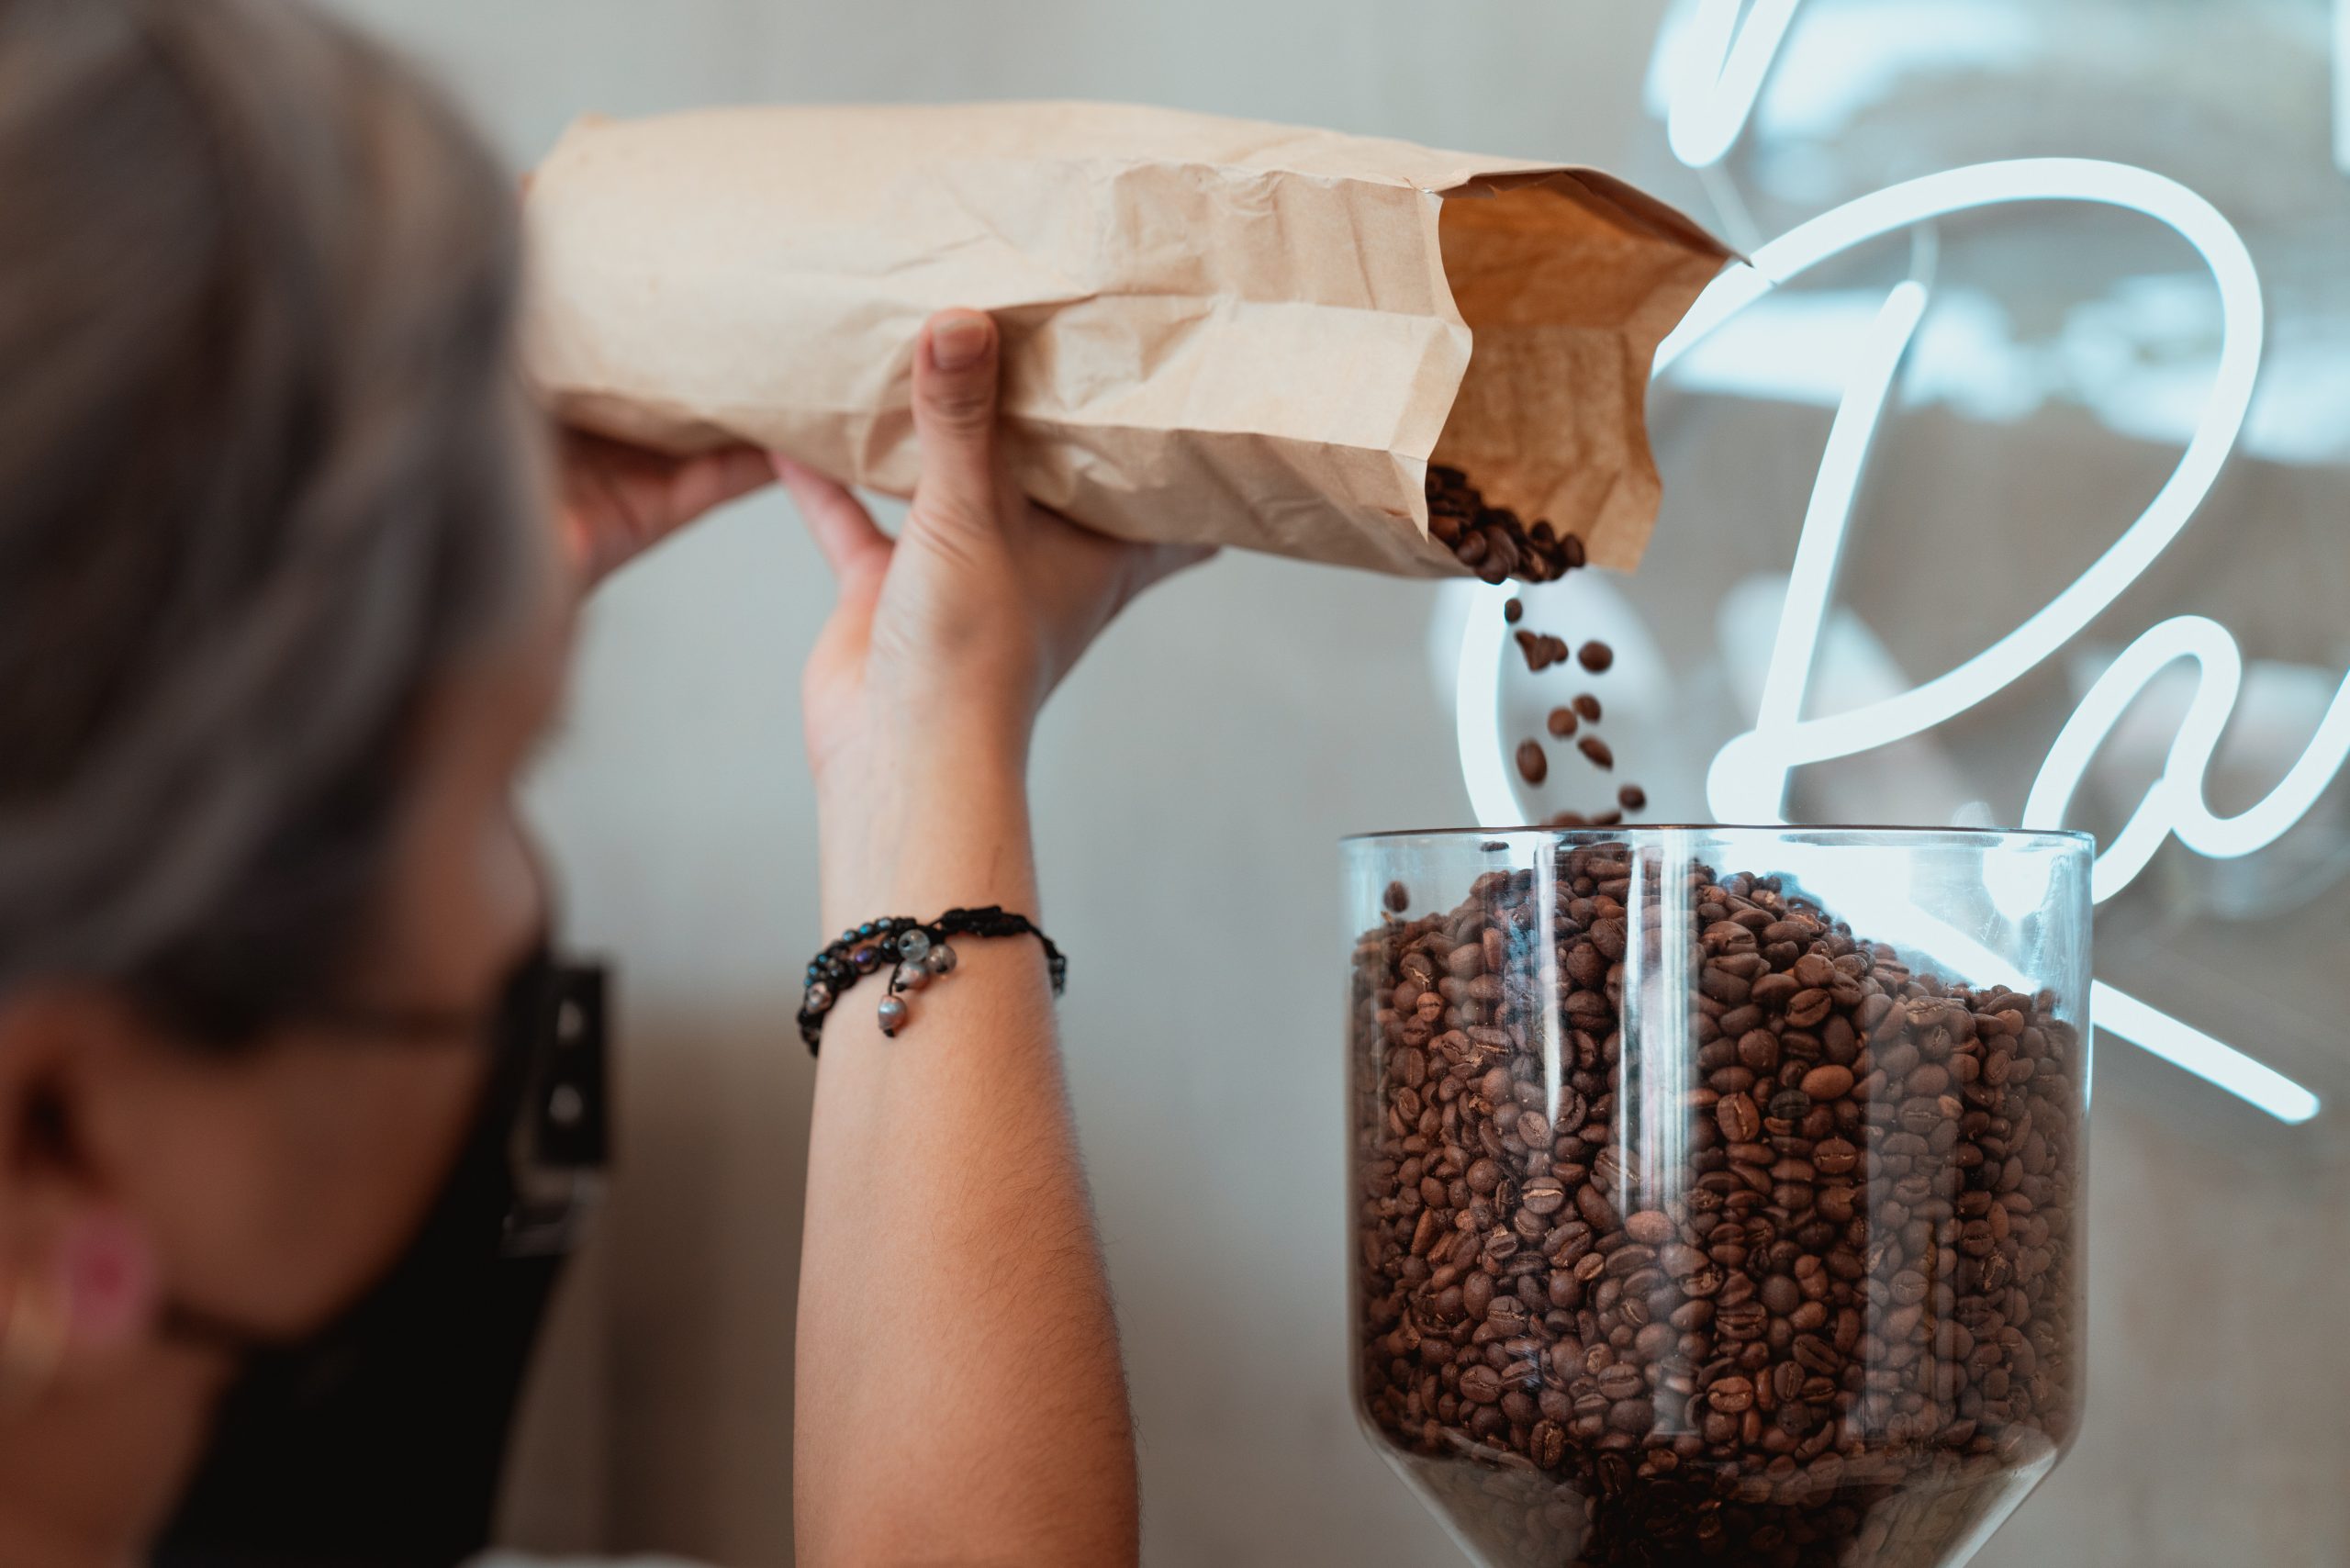 Transforming Quality Control Processes with Digital Logsheets
Photo by Los  Muertos Crew: https://www.pexels.com/photo/photo-of-barista-pouring-fresh-coffee-beans-on-coffee-grinder-7487360/